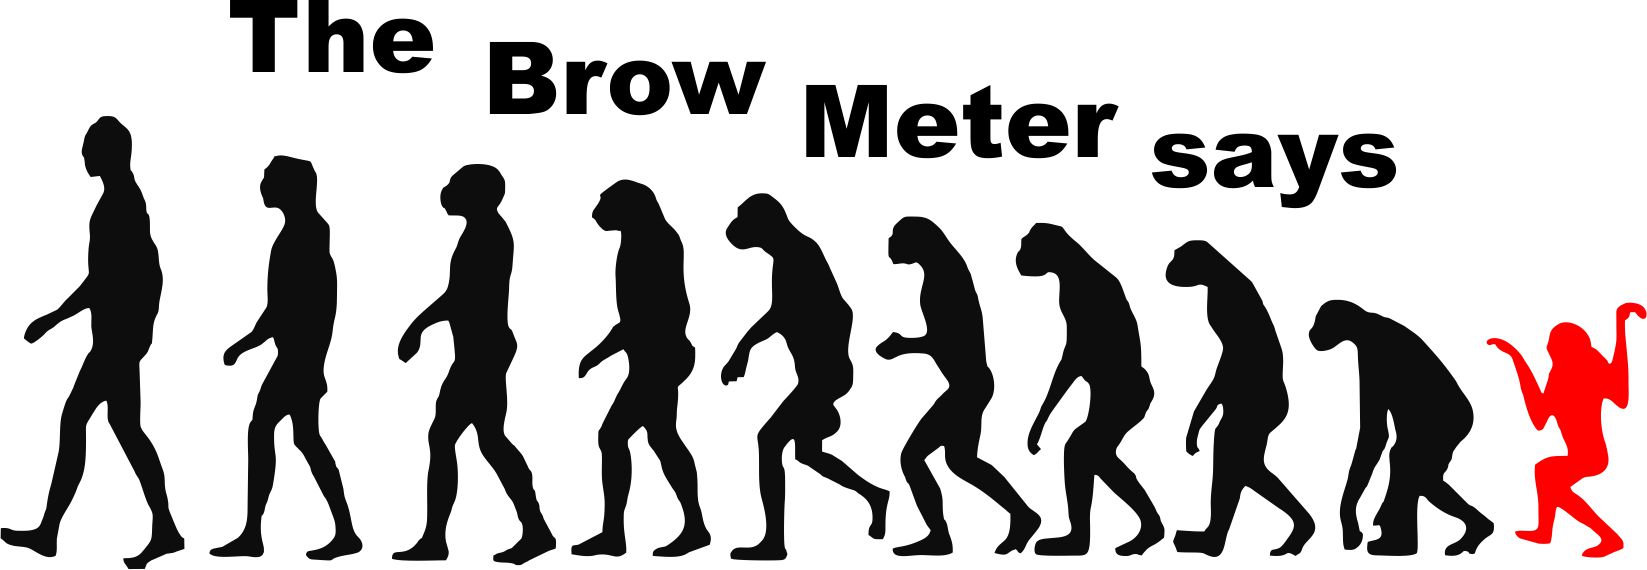 The Brow Meter